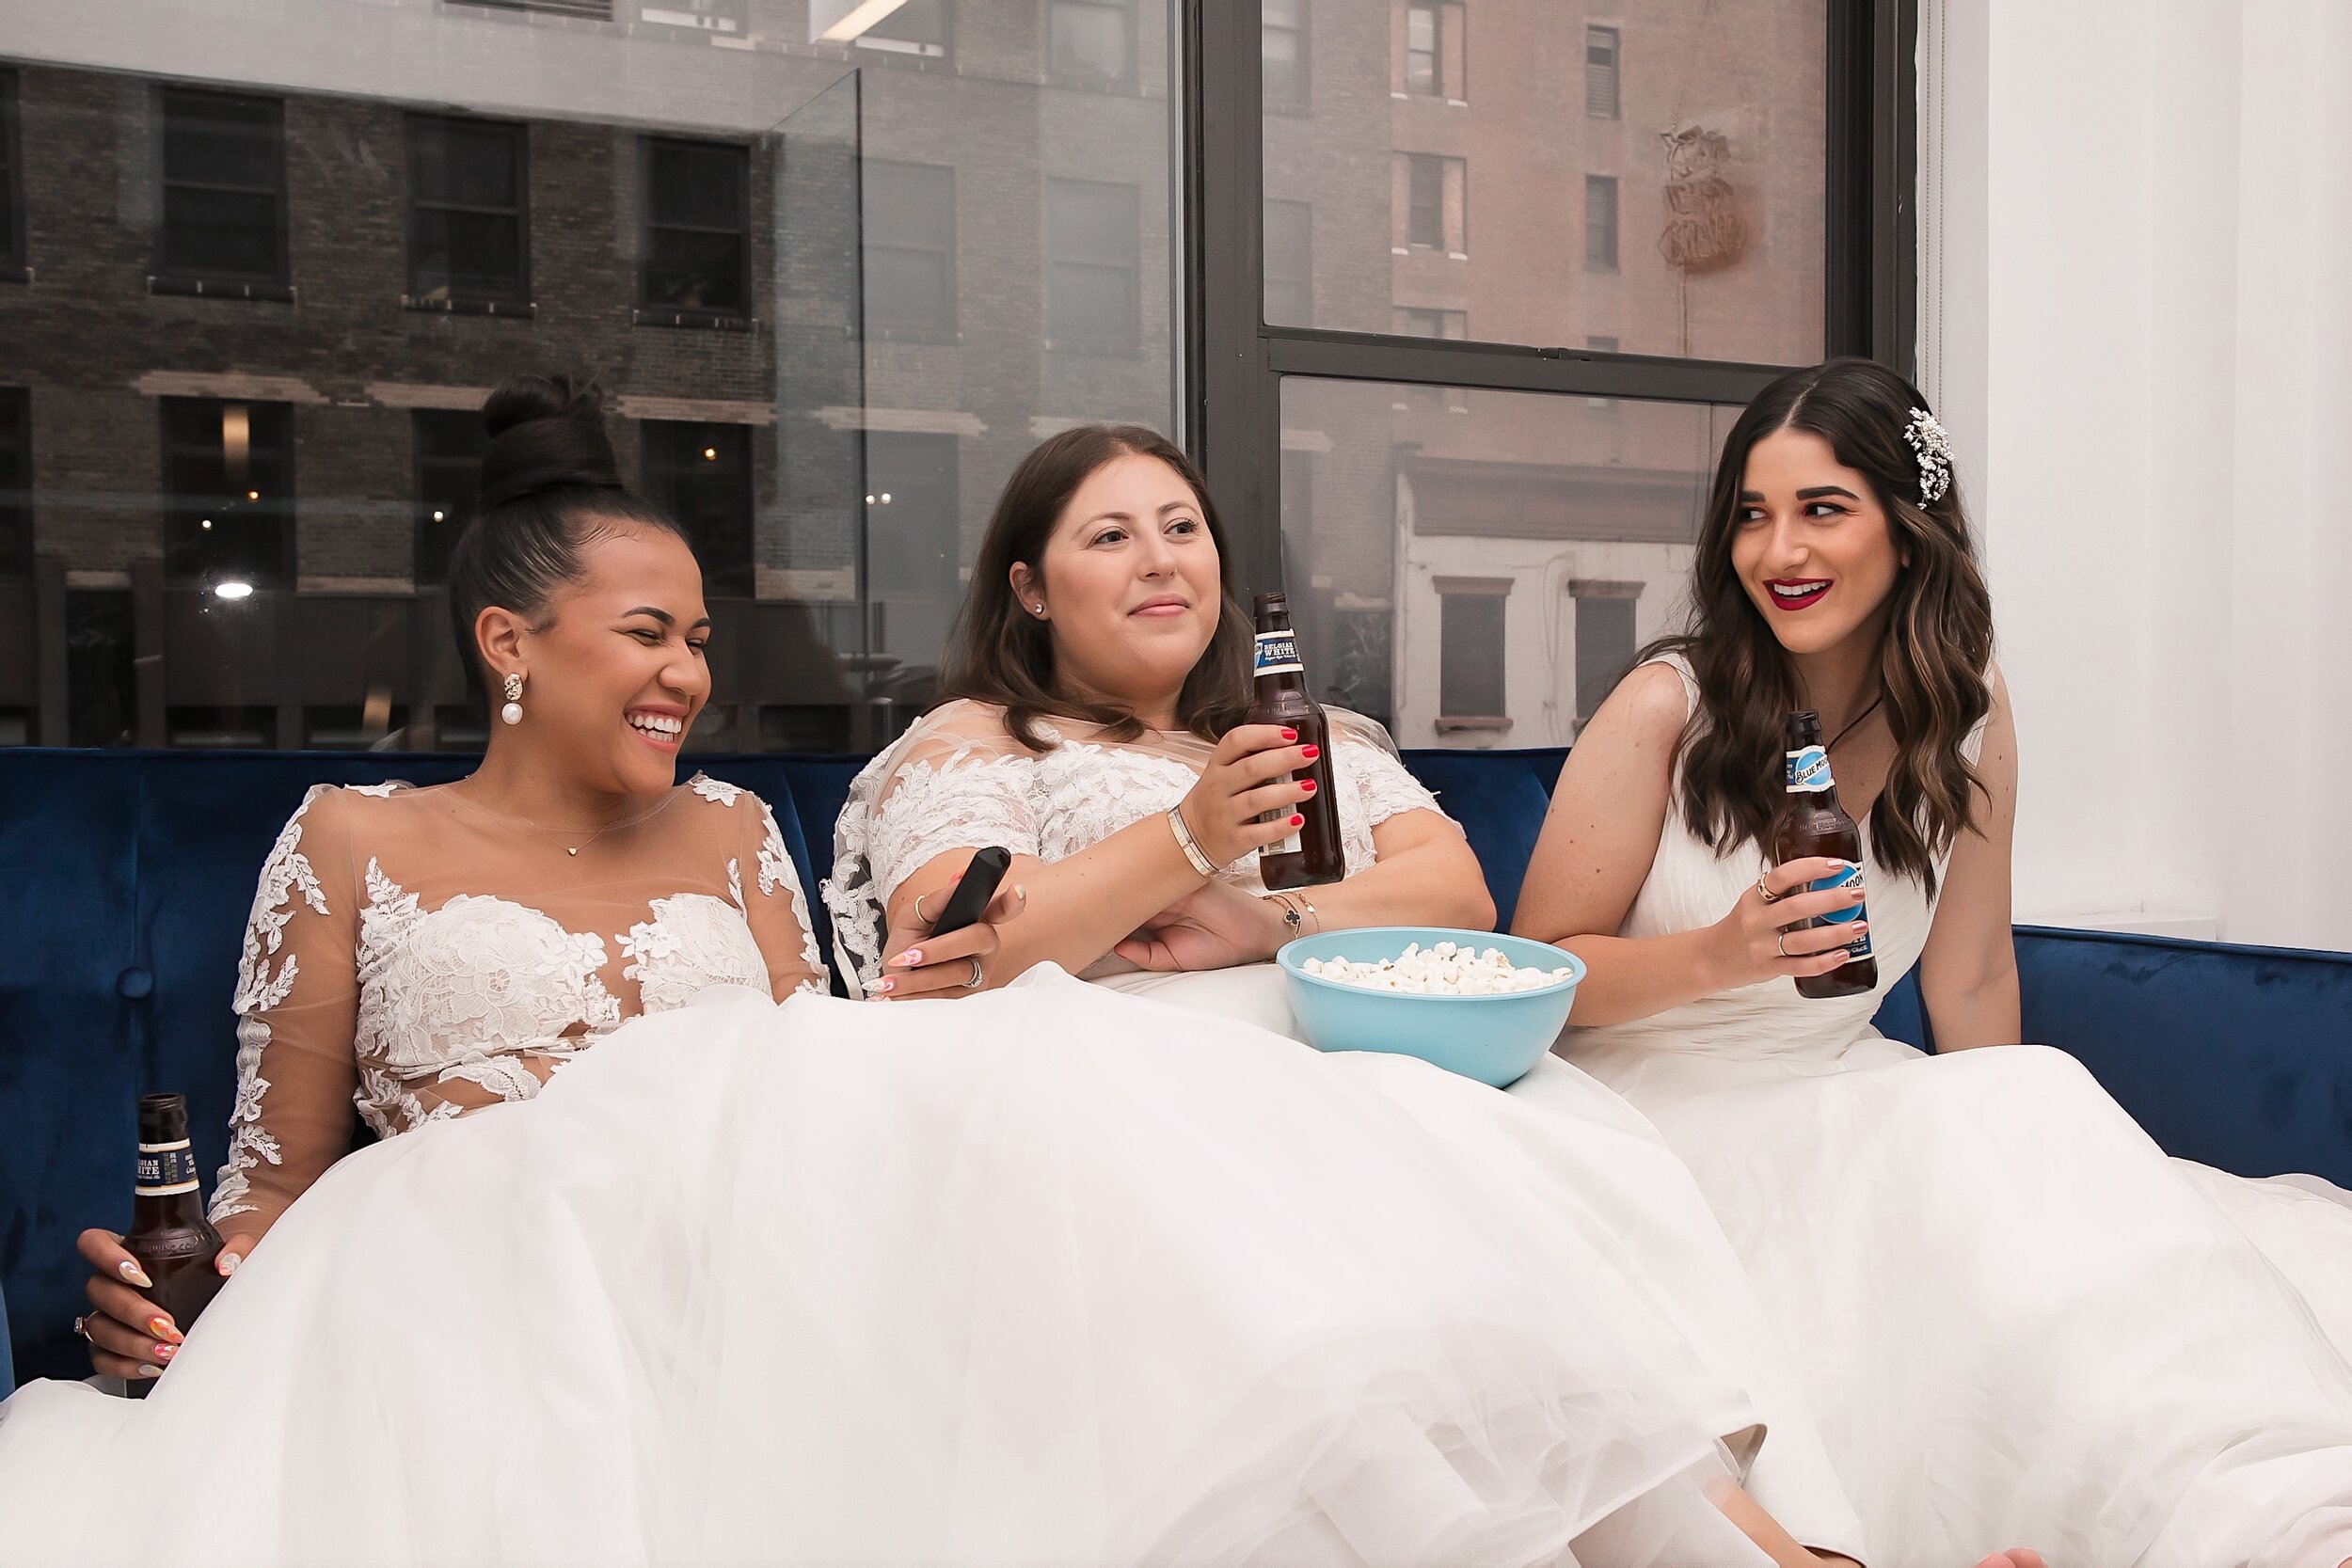 Recreating A Scene From Friends How To Plan A Group Photoshoot Esther Santer NYC Blogging Photoshoot Wedding Dresses Gowns White Rachel Monica Phoebe Popcorn Coffee Movie Night Funny Cosplay Bridal Hair Pretty Beautiful Girls  Women Beer Style Trend.JPG